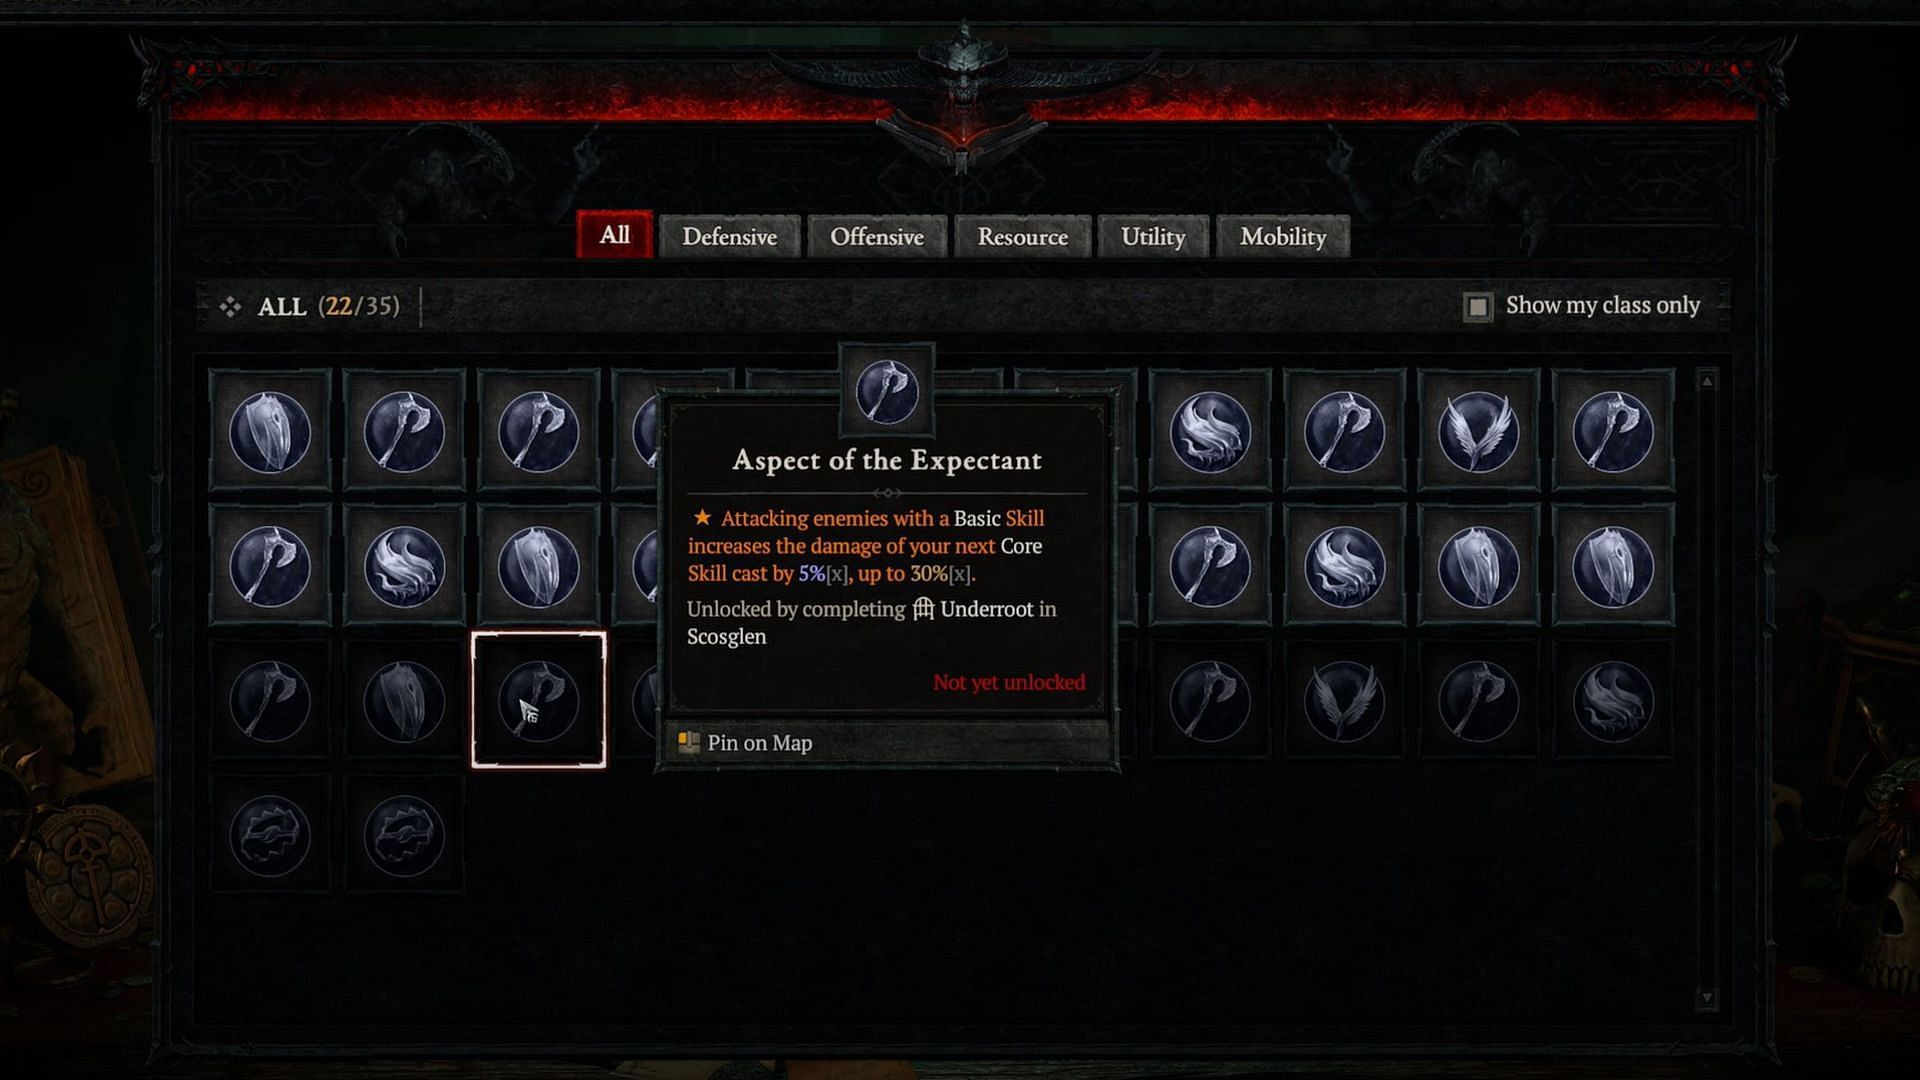 The Aspect of the Expectant in Diablo 4 (Image via Blizzard Entertainment)